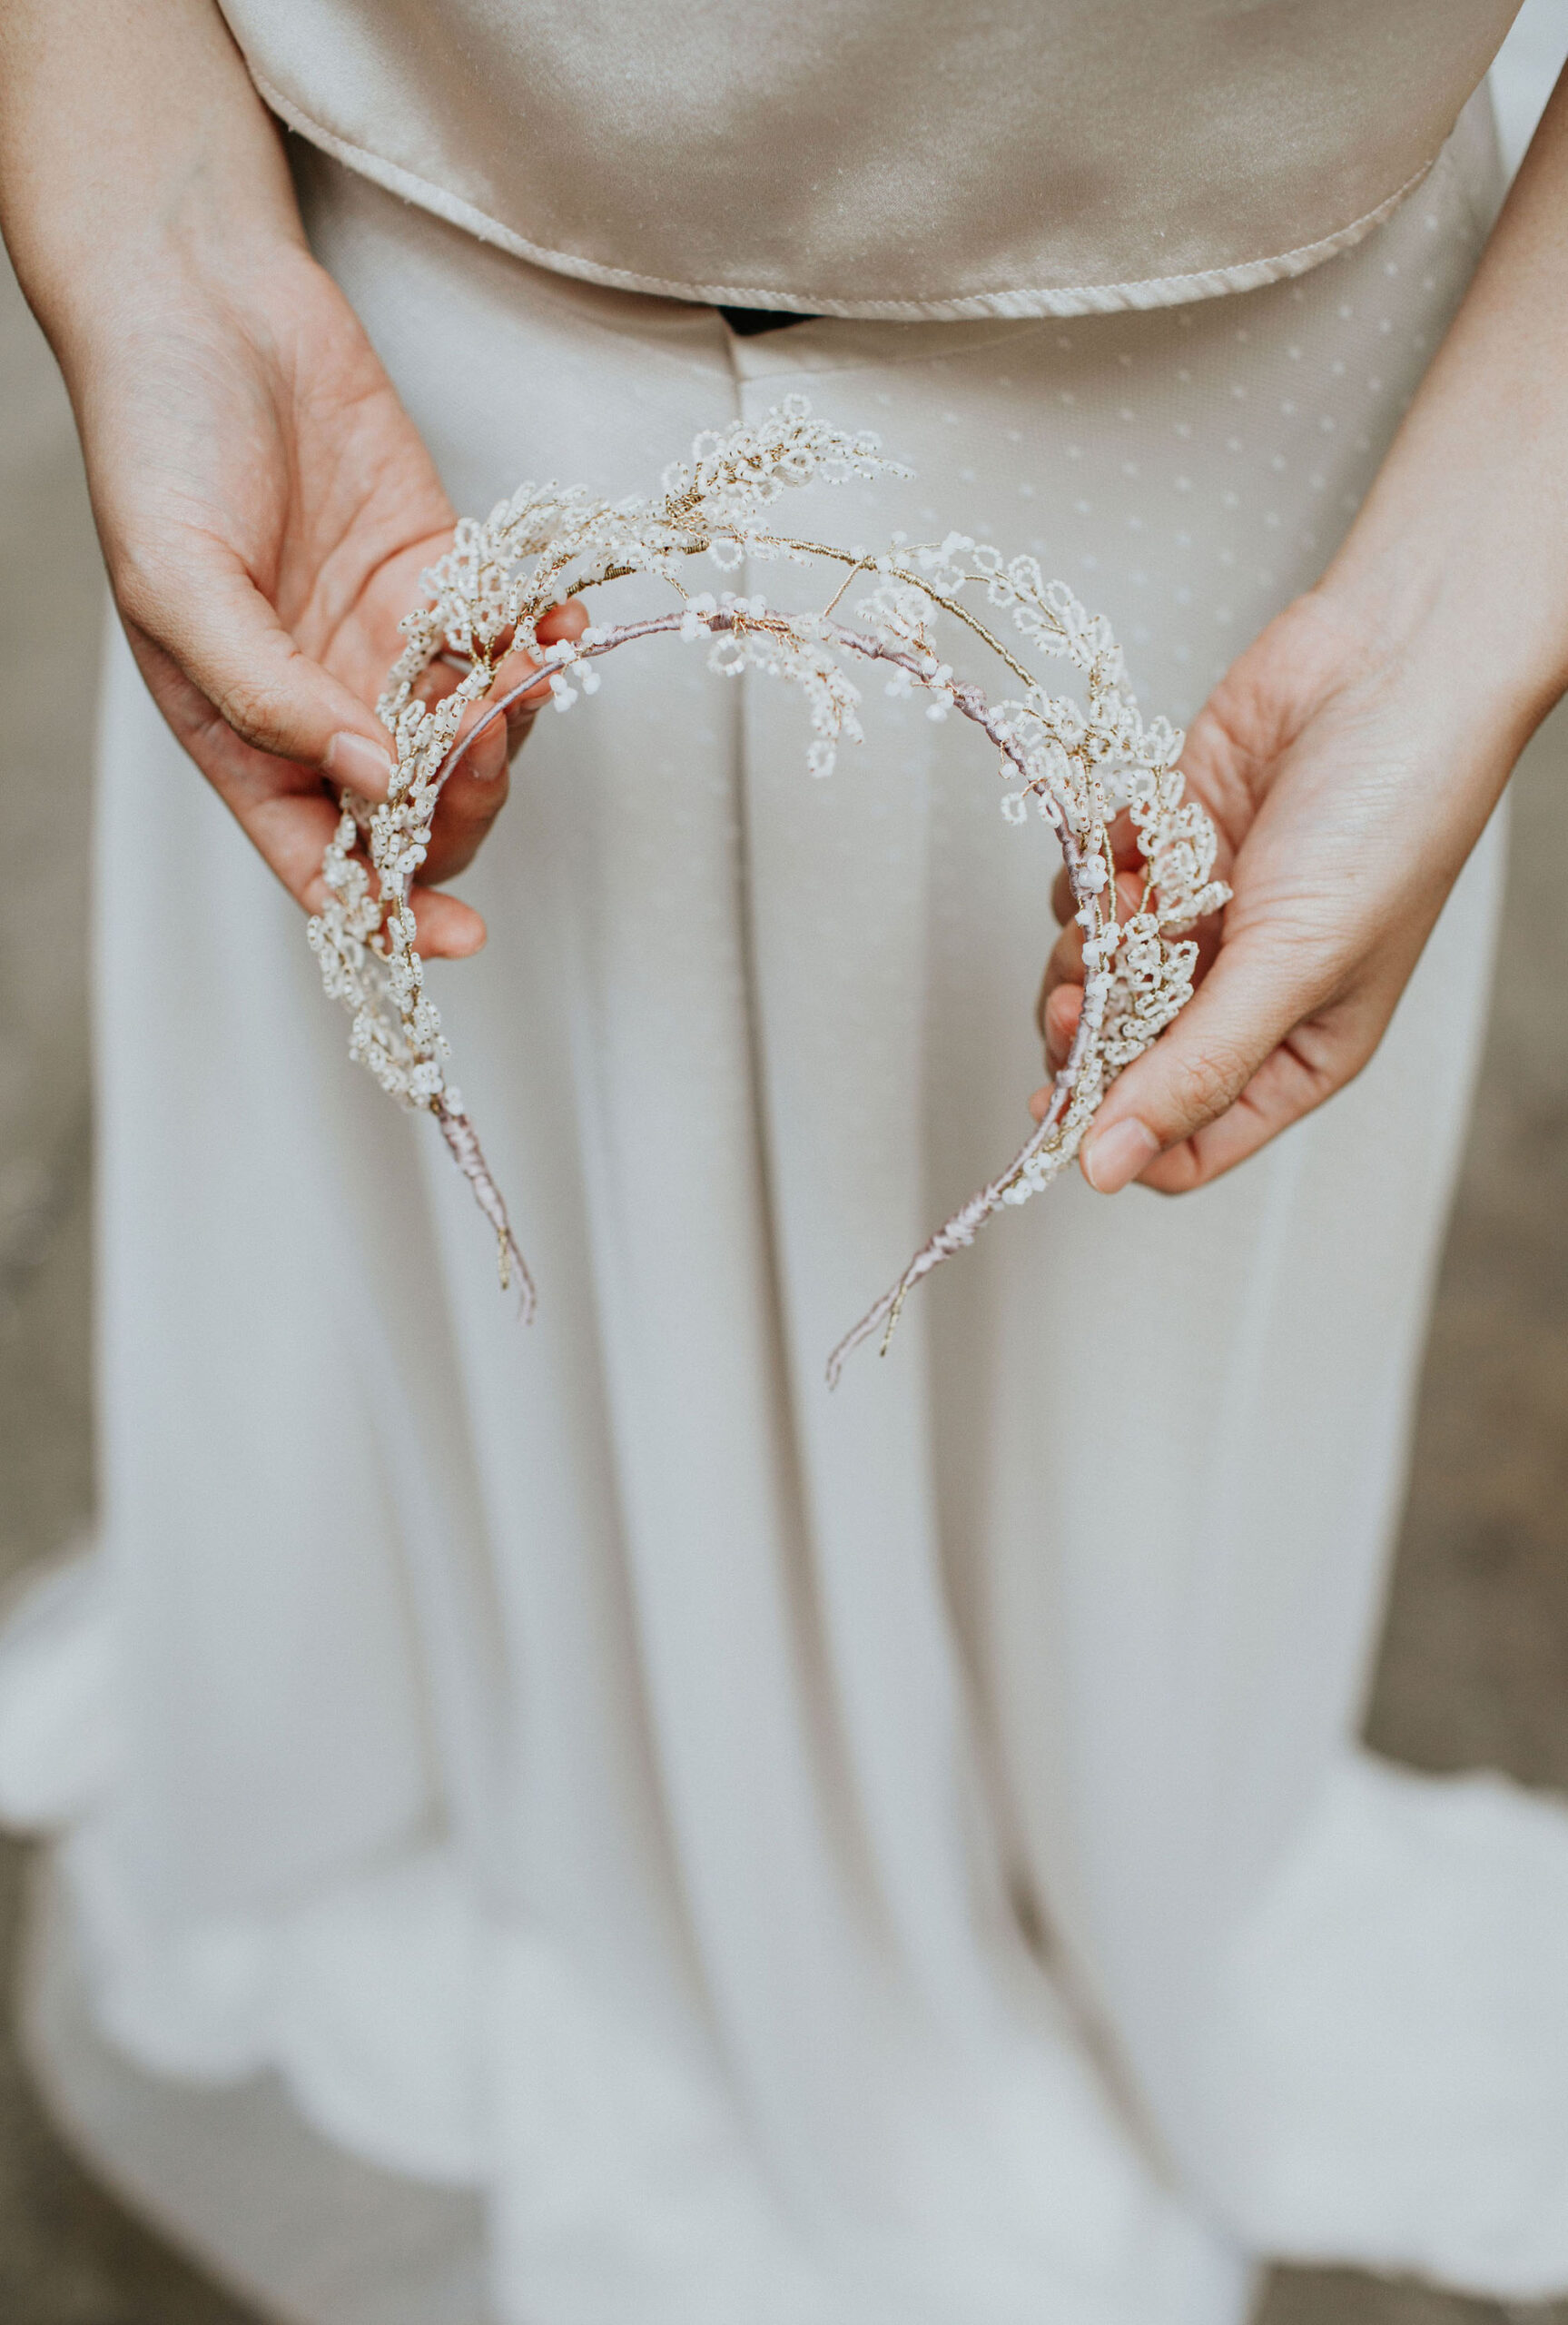 bespoke UK bridal accessories by Clare Lloyd with delicate floral designs. Captured by Oxi Photography